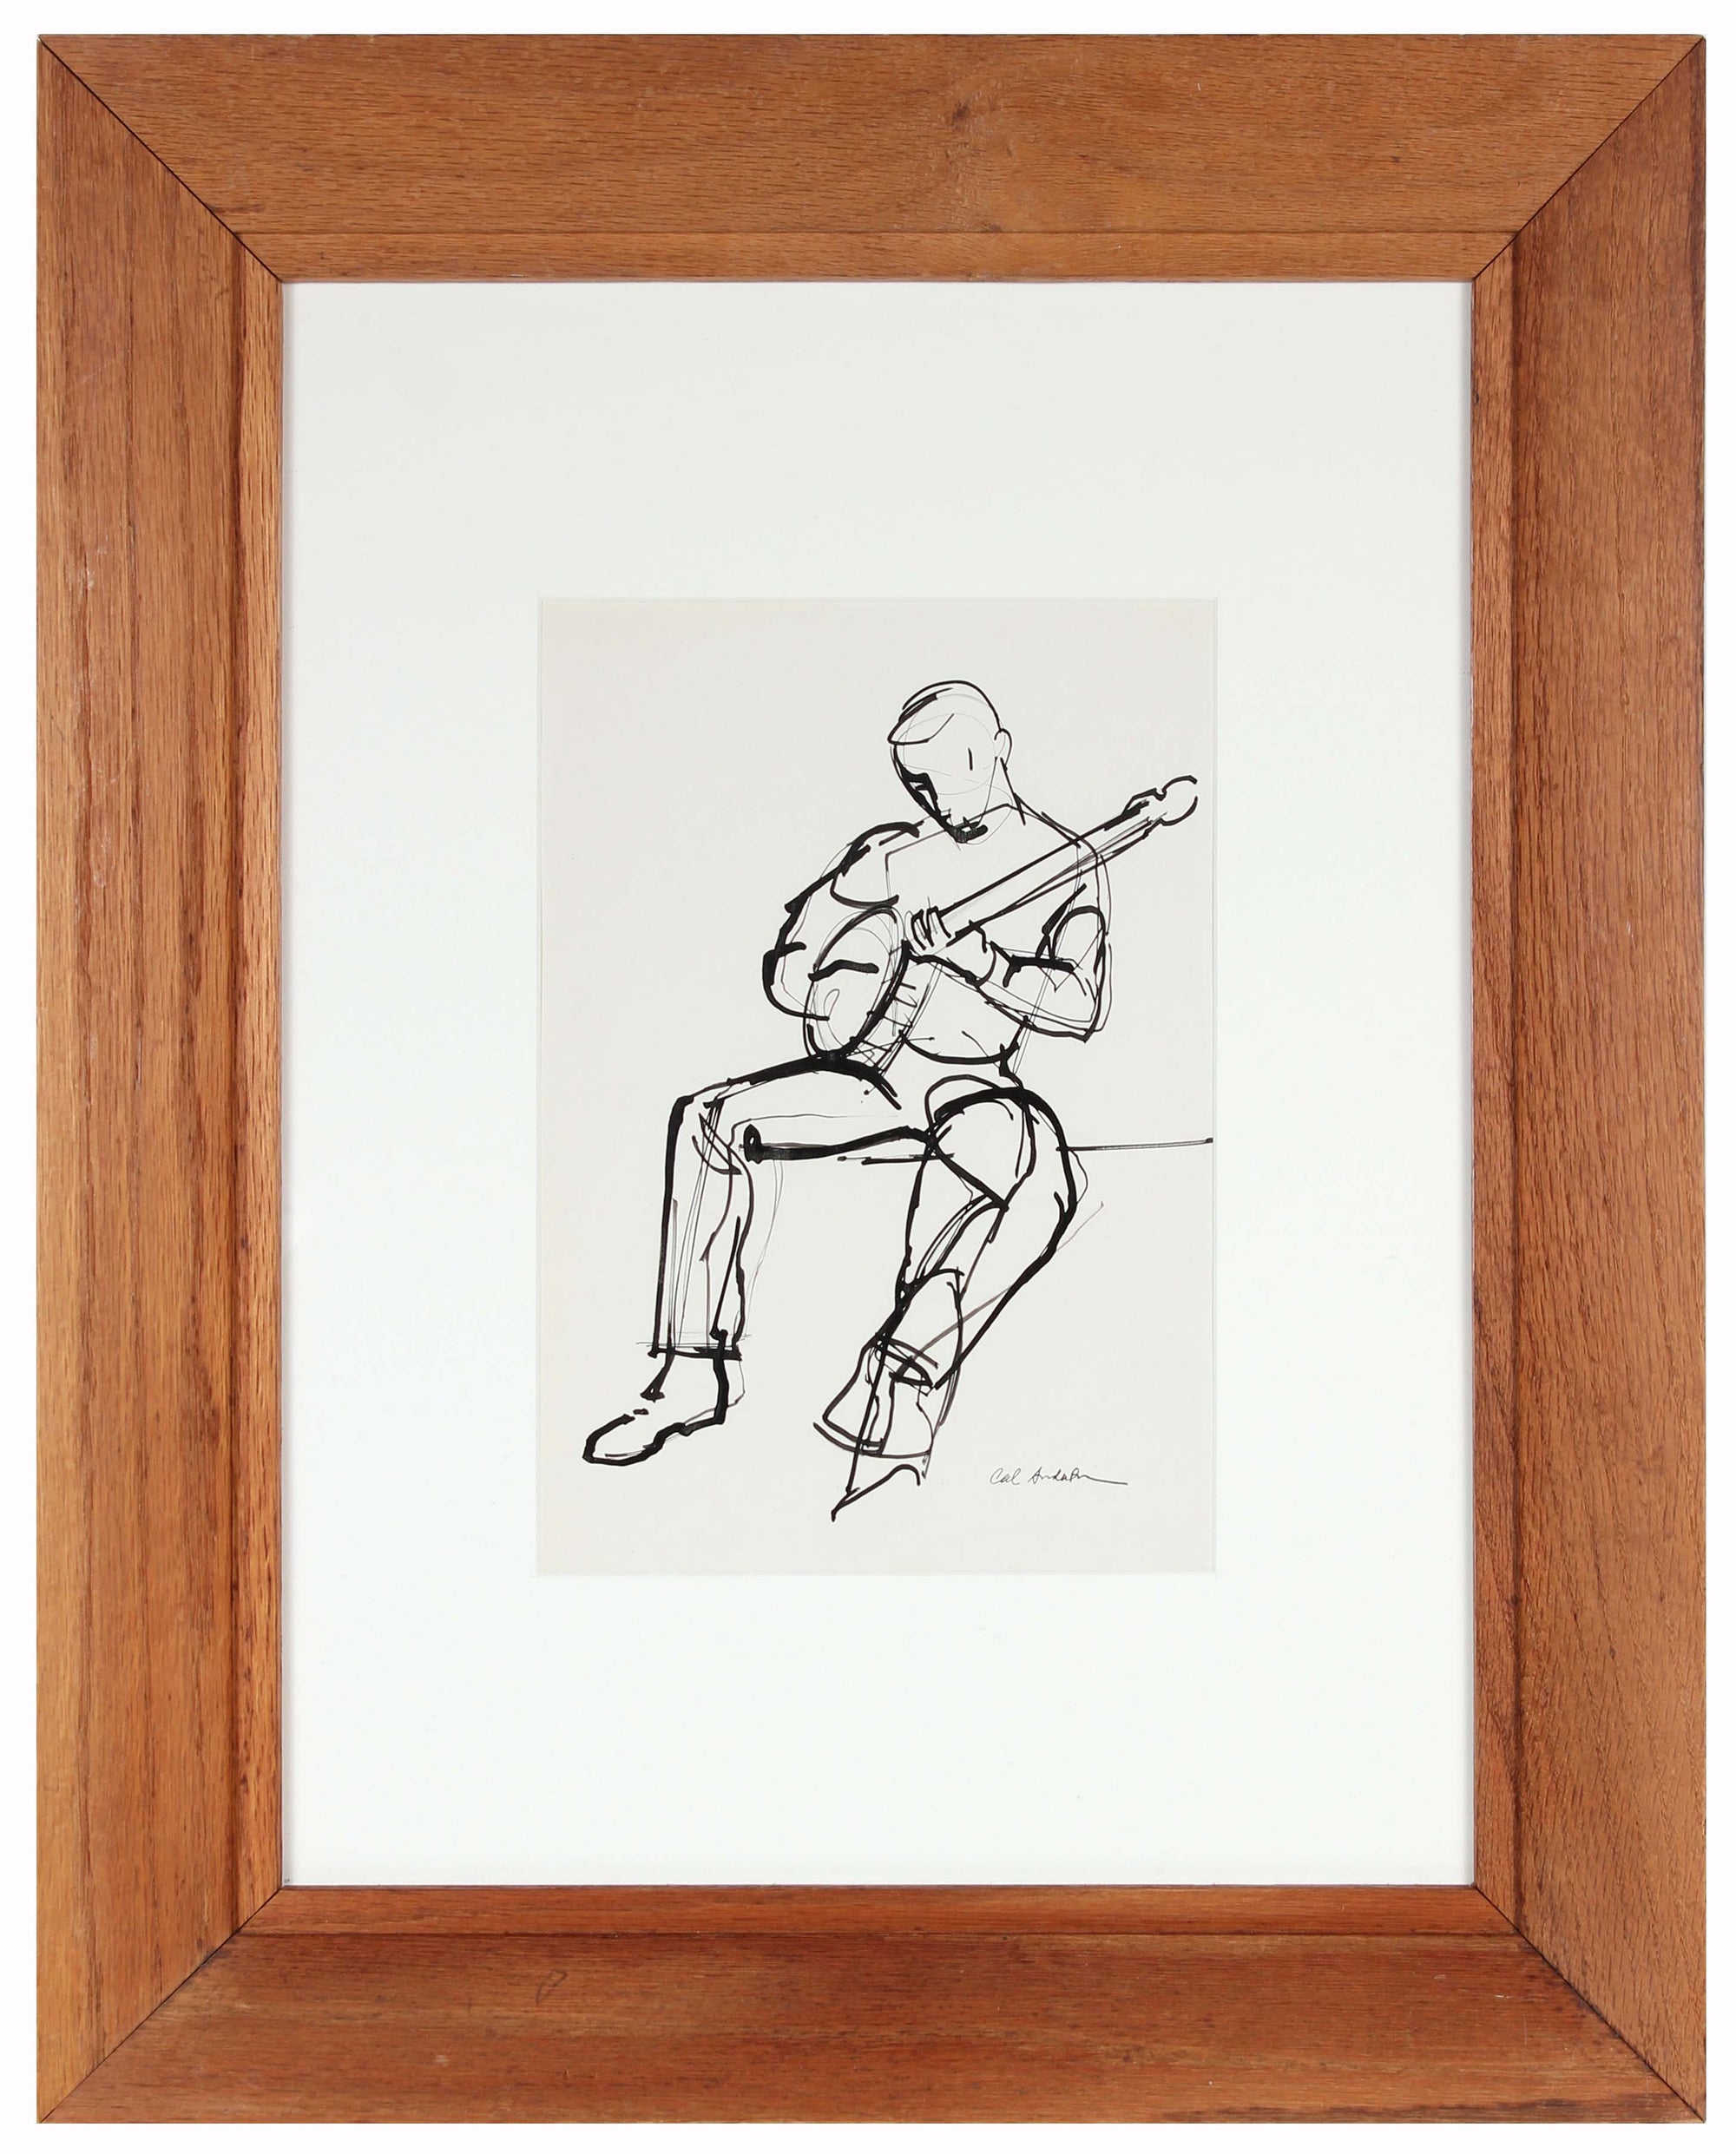 Figural Study of Musician<br>Mid 20th Century Ink on Paper<br><br>#97510